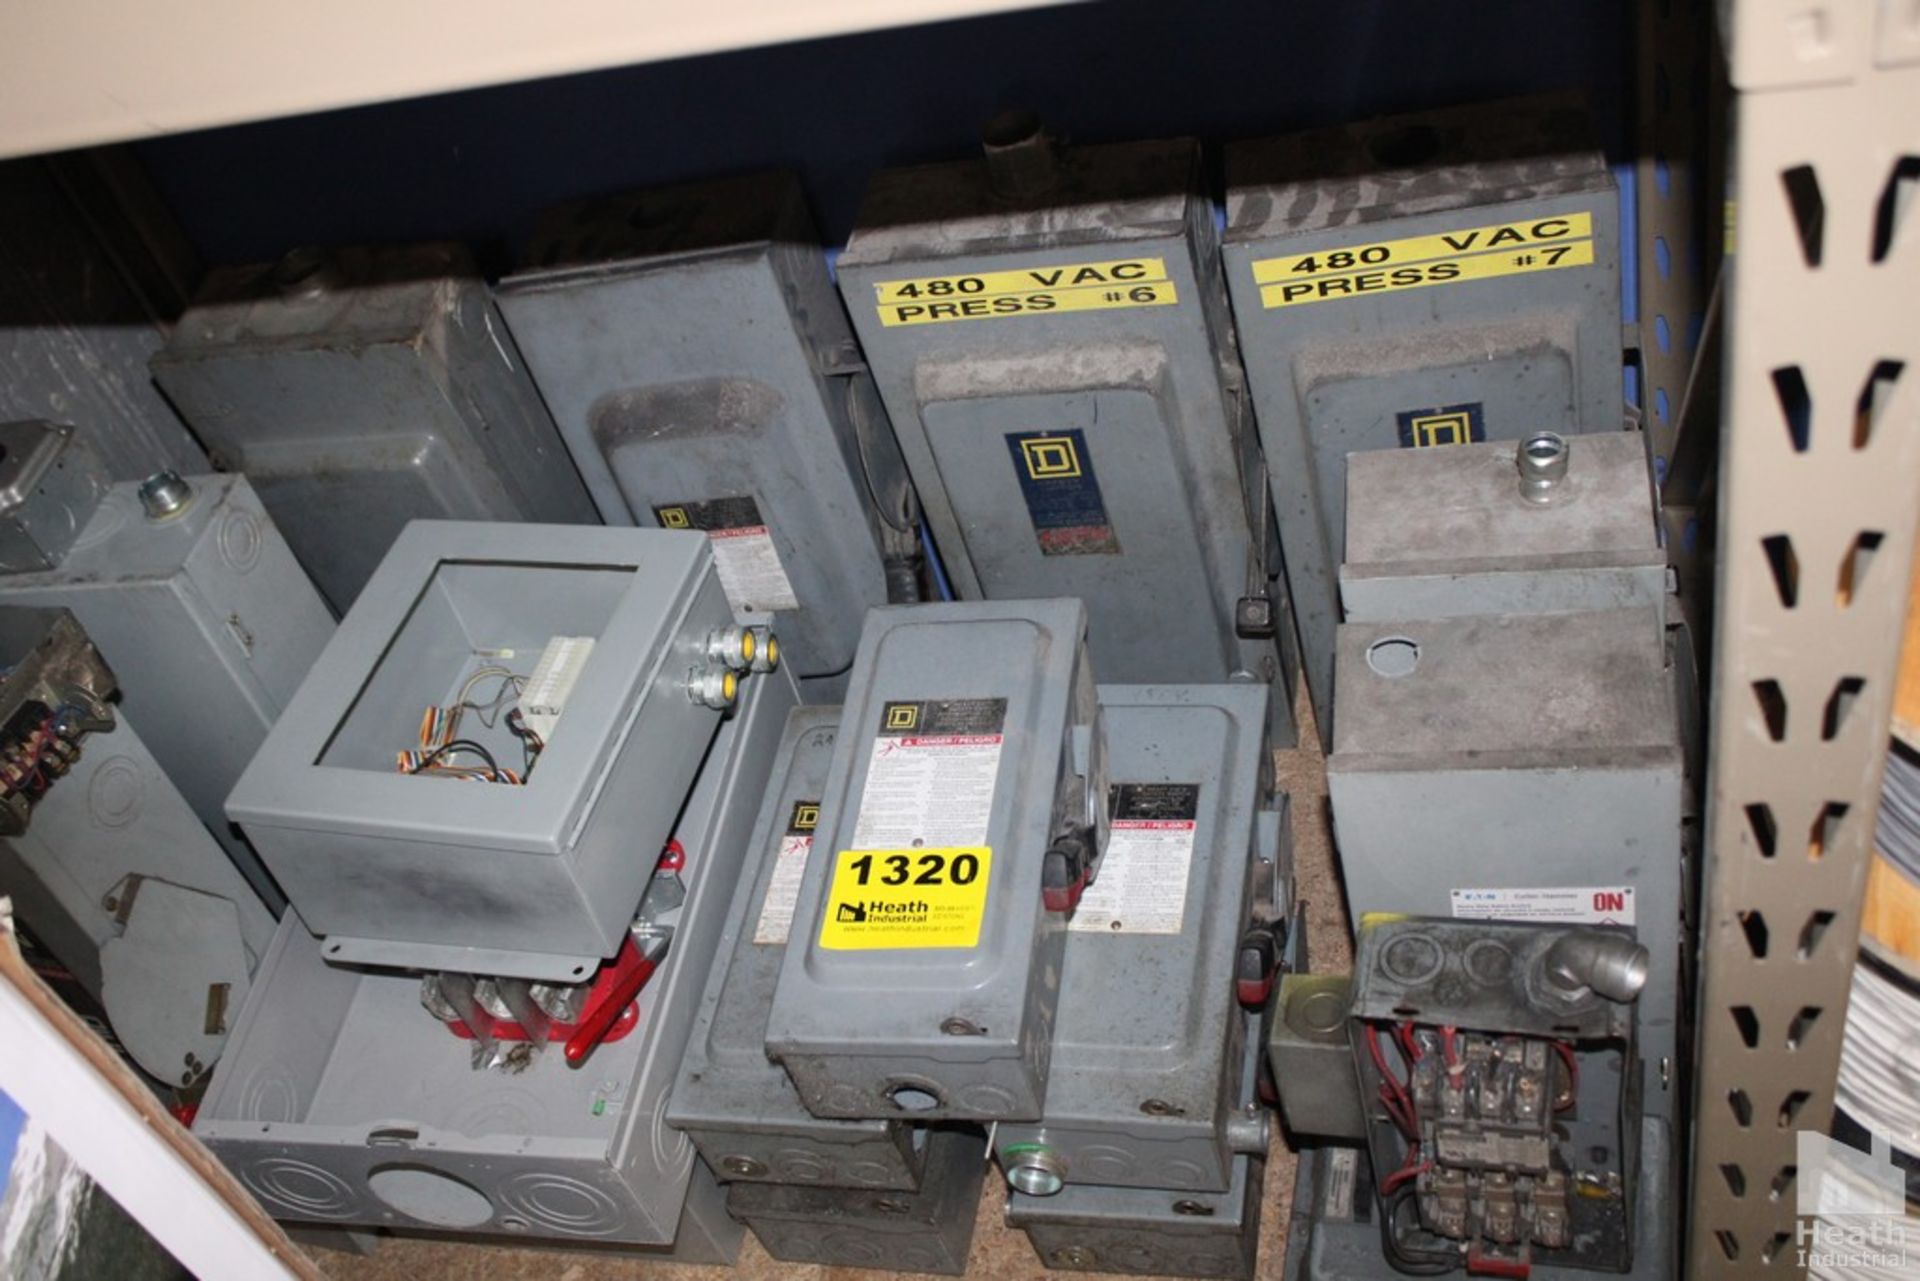 LARGE QUANTITY OF ELECTRIC CIRCUIT BOXES, SAFETY SWITCHES, ETC.